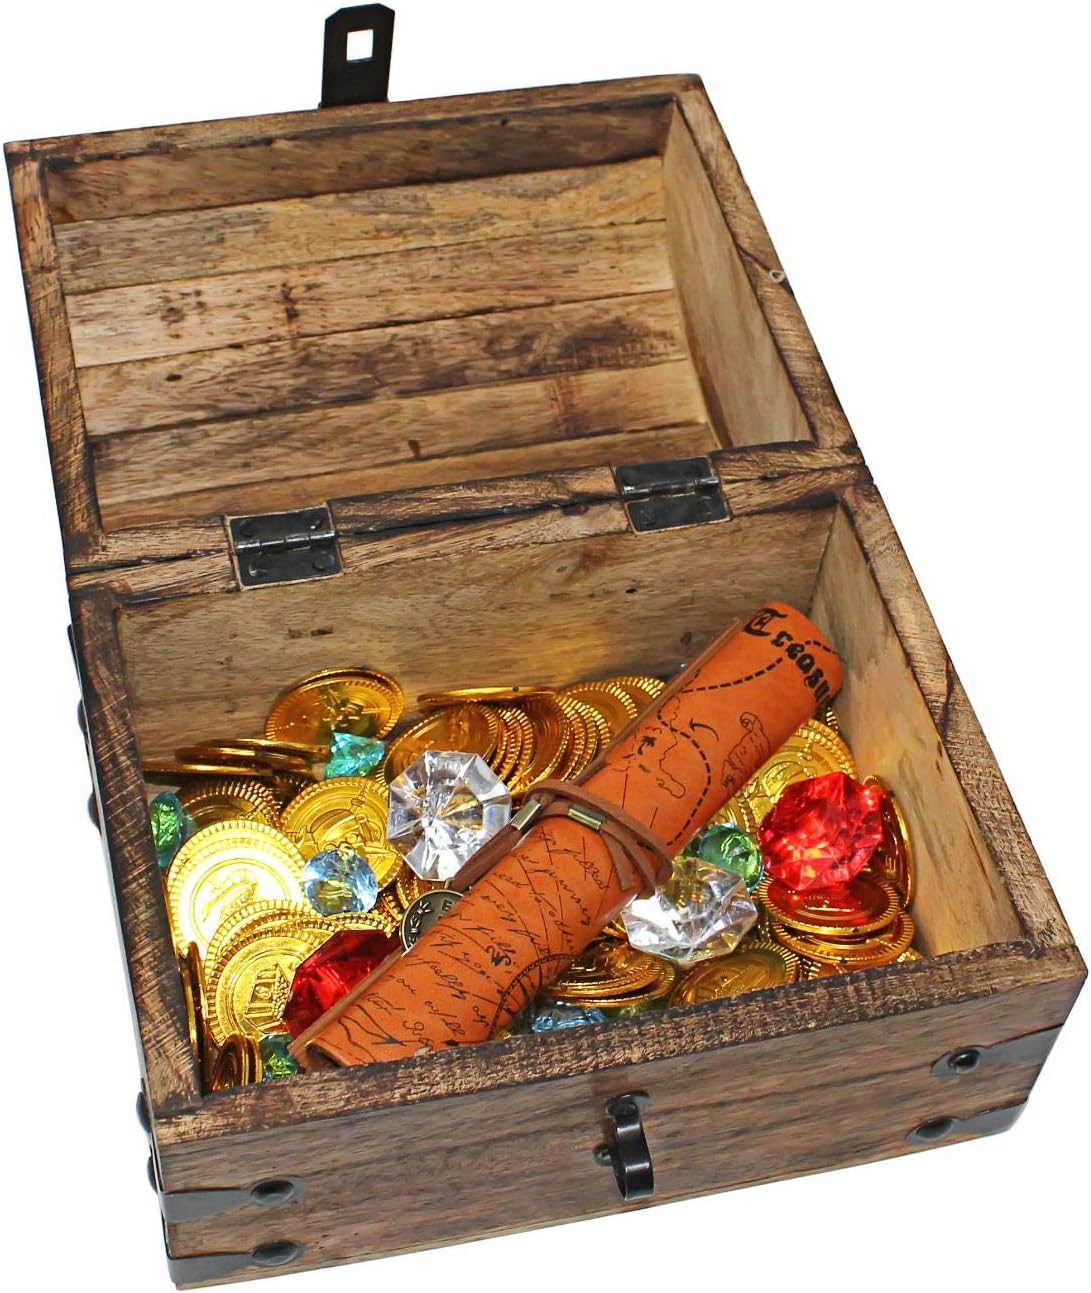 No Nautical Cove Wooden Pirates Treasure Chest Box with a Free Pirate  Treasure Map and Gold Coins/Gems